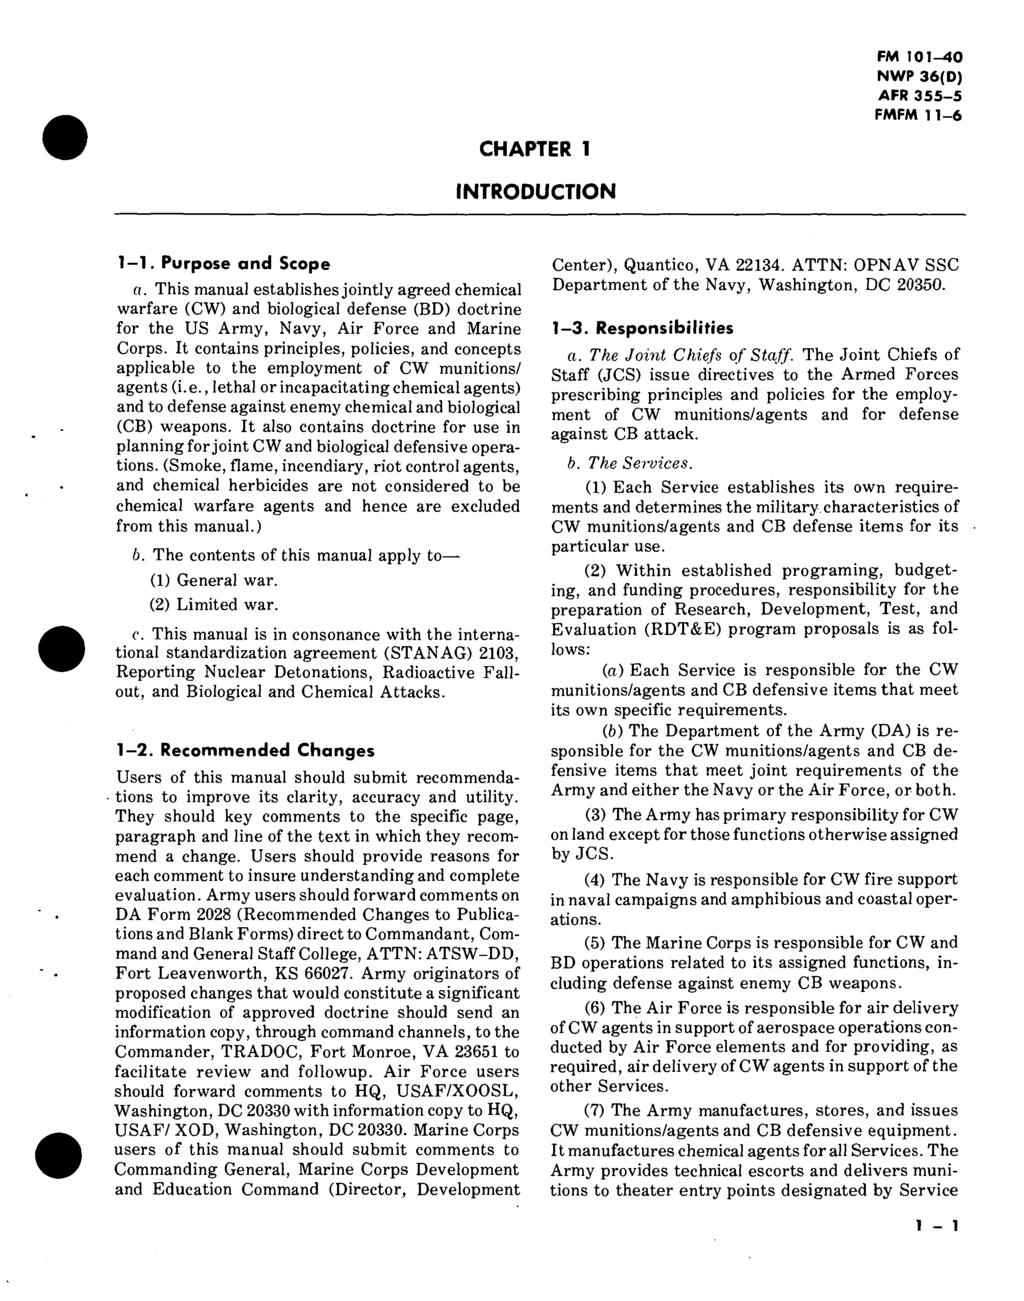 CHAPTER 1 INTRODUCTION 1-1. Purpose and Scope o. This manual establishes jointly agreed chemical warfare (CW) and biological defense (BD) doctrine for the US Army, Navy, Air Force and Marine Corps.